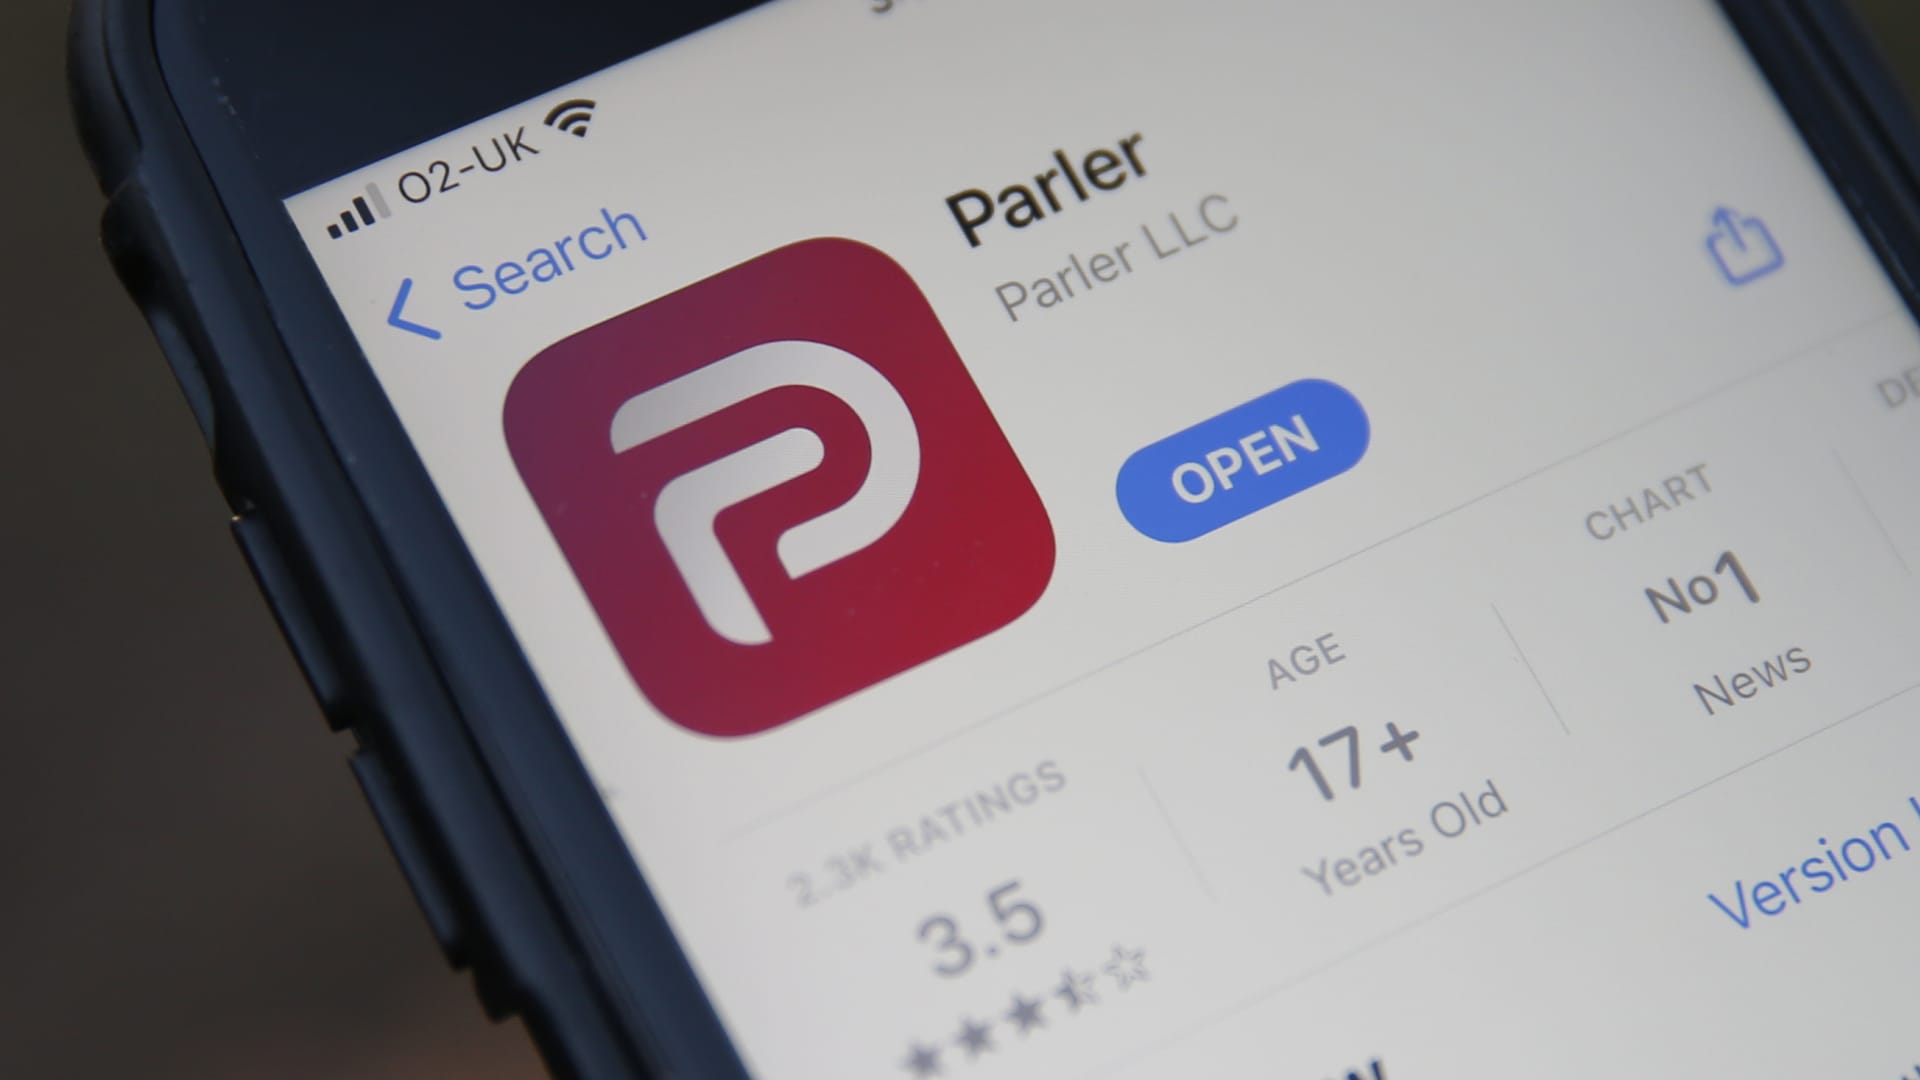 A general view of the the Parler app icon displayed on an iPhone on January 9, 2021 in London, England.